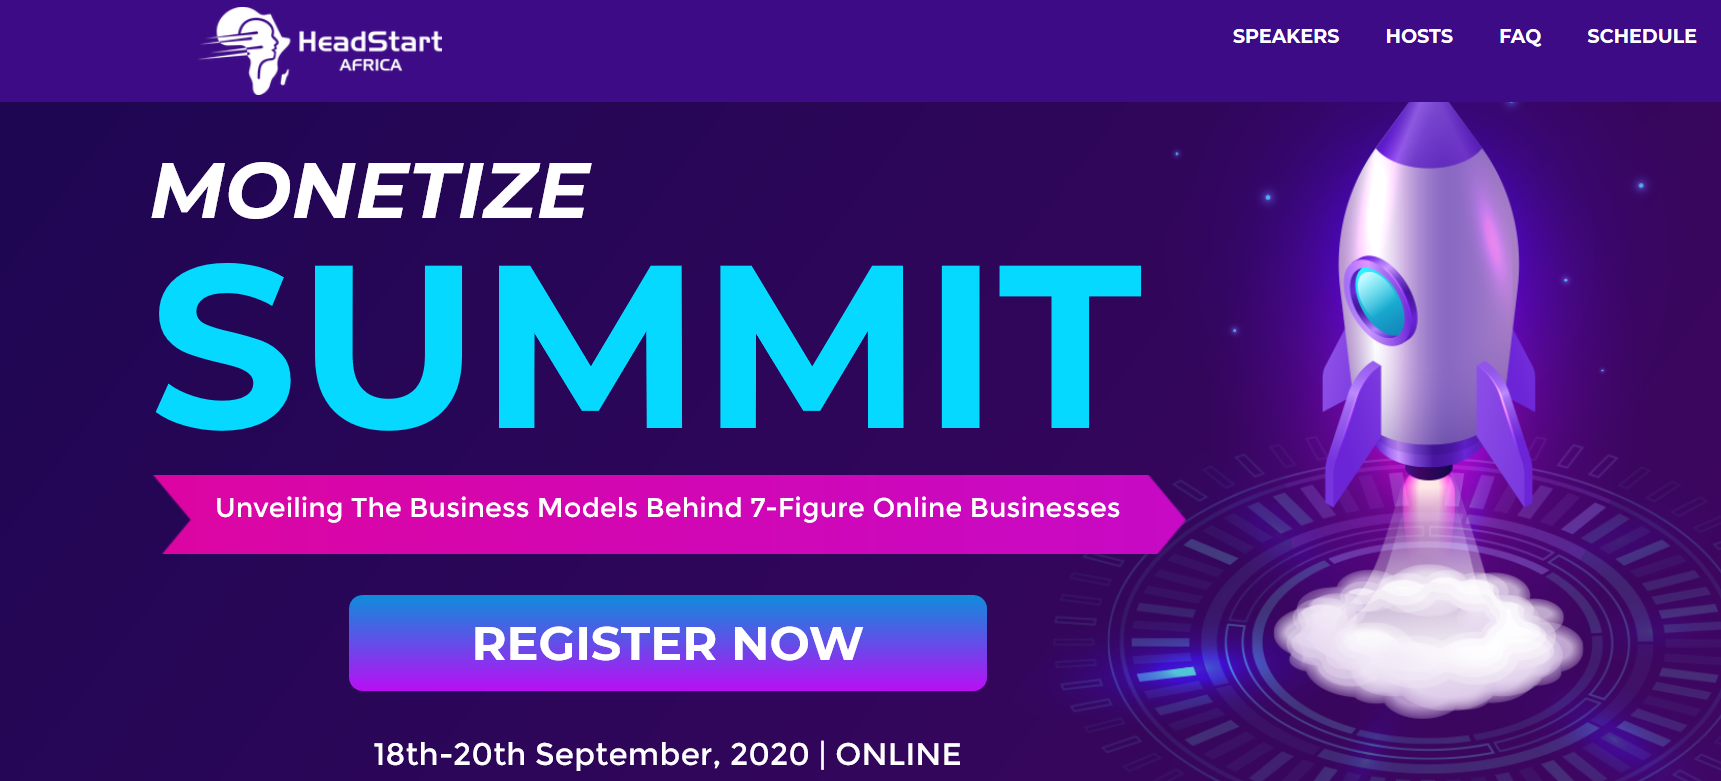 Apply to attend Monetize Summit 2020: Unveiling The Business Models Behind 7-Figure Online Businesses organised by John Obidi of HeadStart Africa.